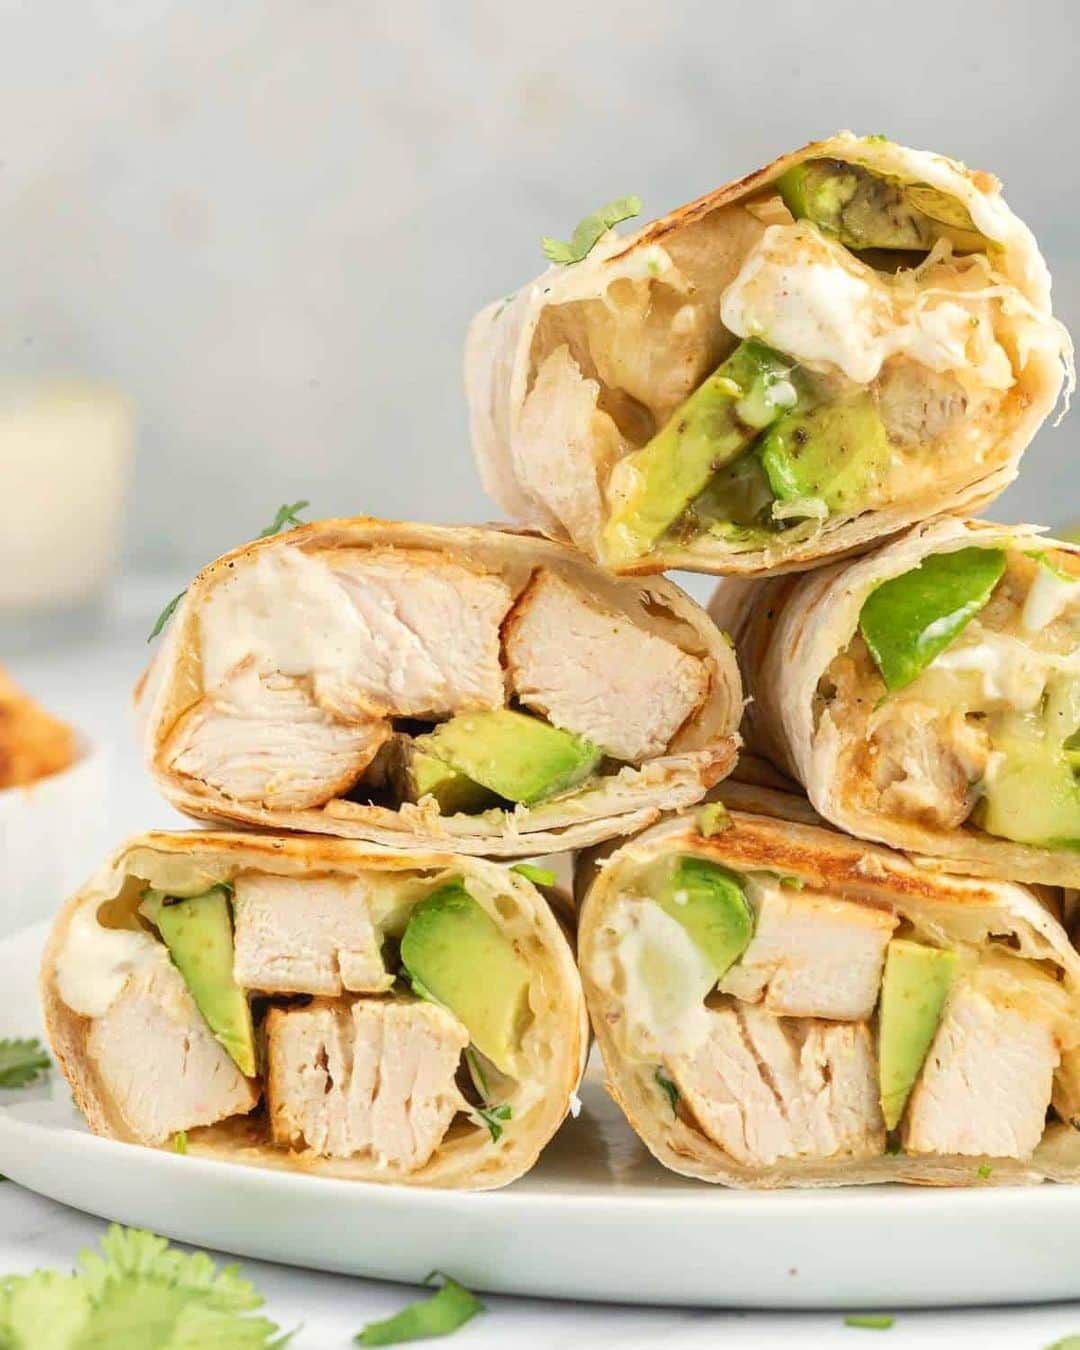 Easy Recipesのインスタグラム：「This delicious chicken avocado wrap is healthy and simple to make, so you don’t have to compromise when time is short. It’s made with ingredients you have on hand and can be prepped in advance for a quick on-the-go lunch option.  Grab the full recipe from the link in my bio @cookinwithmima  https://www.cookinwithmima.com/chicken-avocado-wrap/」